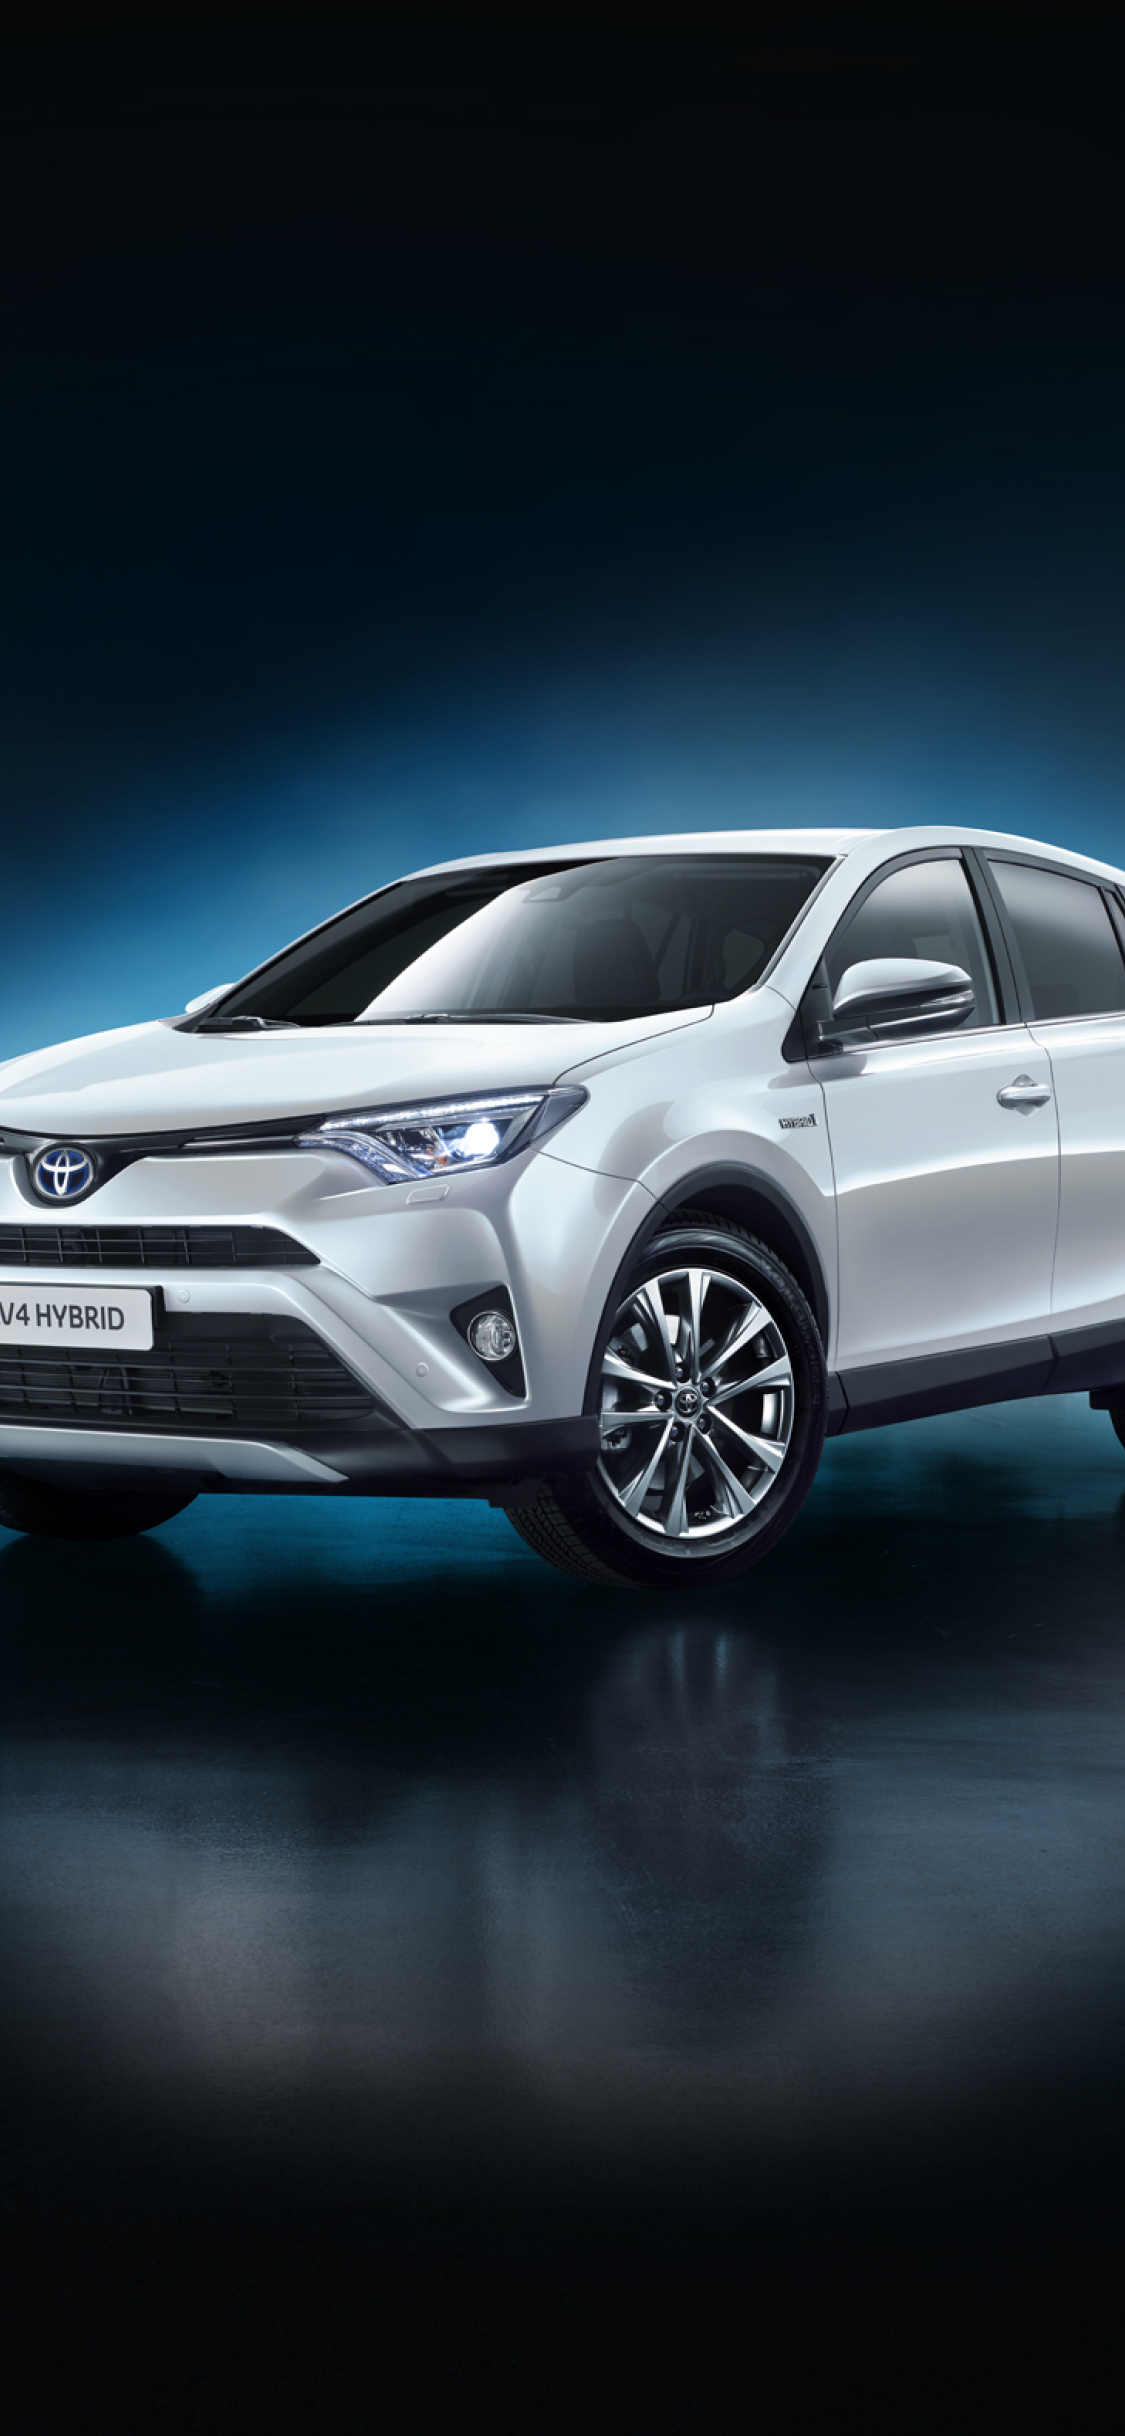 1125x2436 Toyota Rav4 Hybrid Iphone Xs Iphone 10 Iphone X Wallpaper Hd Cars 4k Wallpapers Images Photos And Background